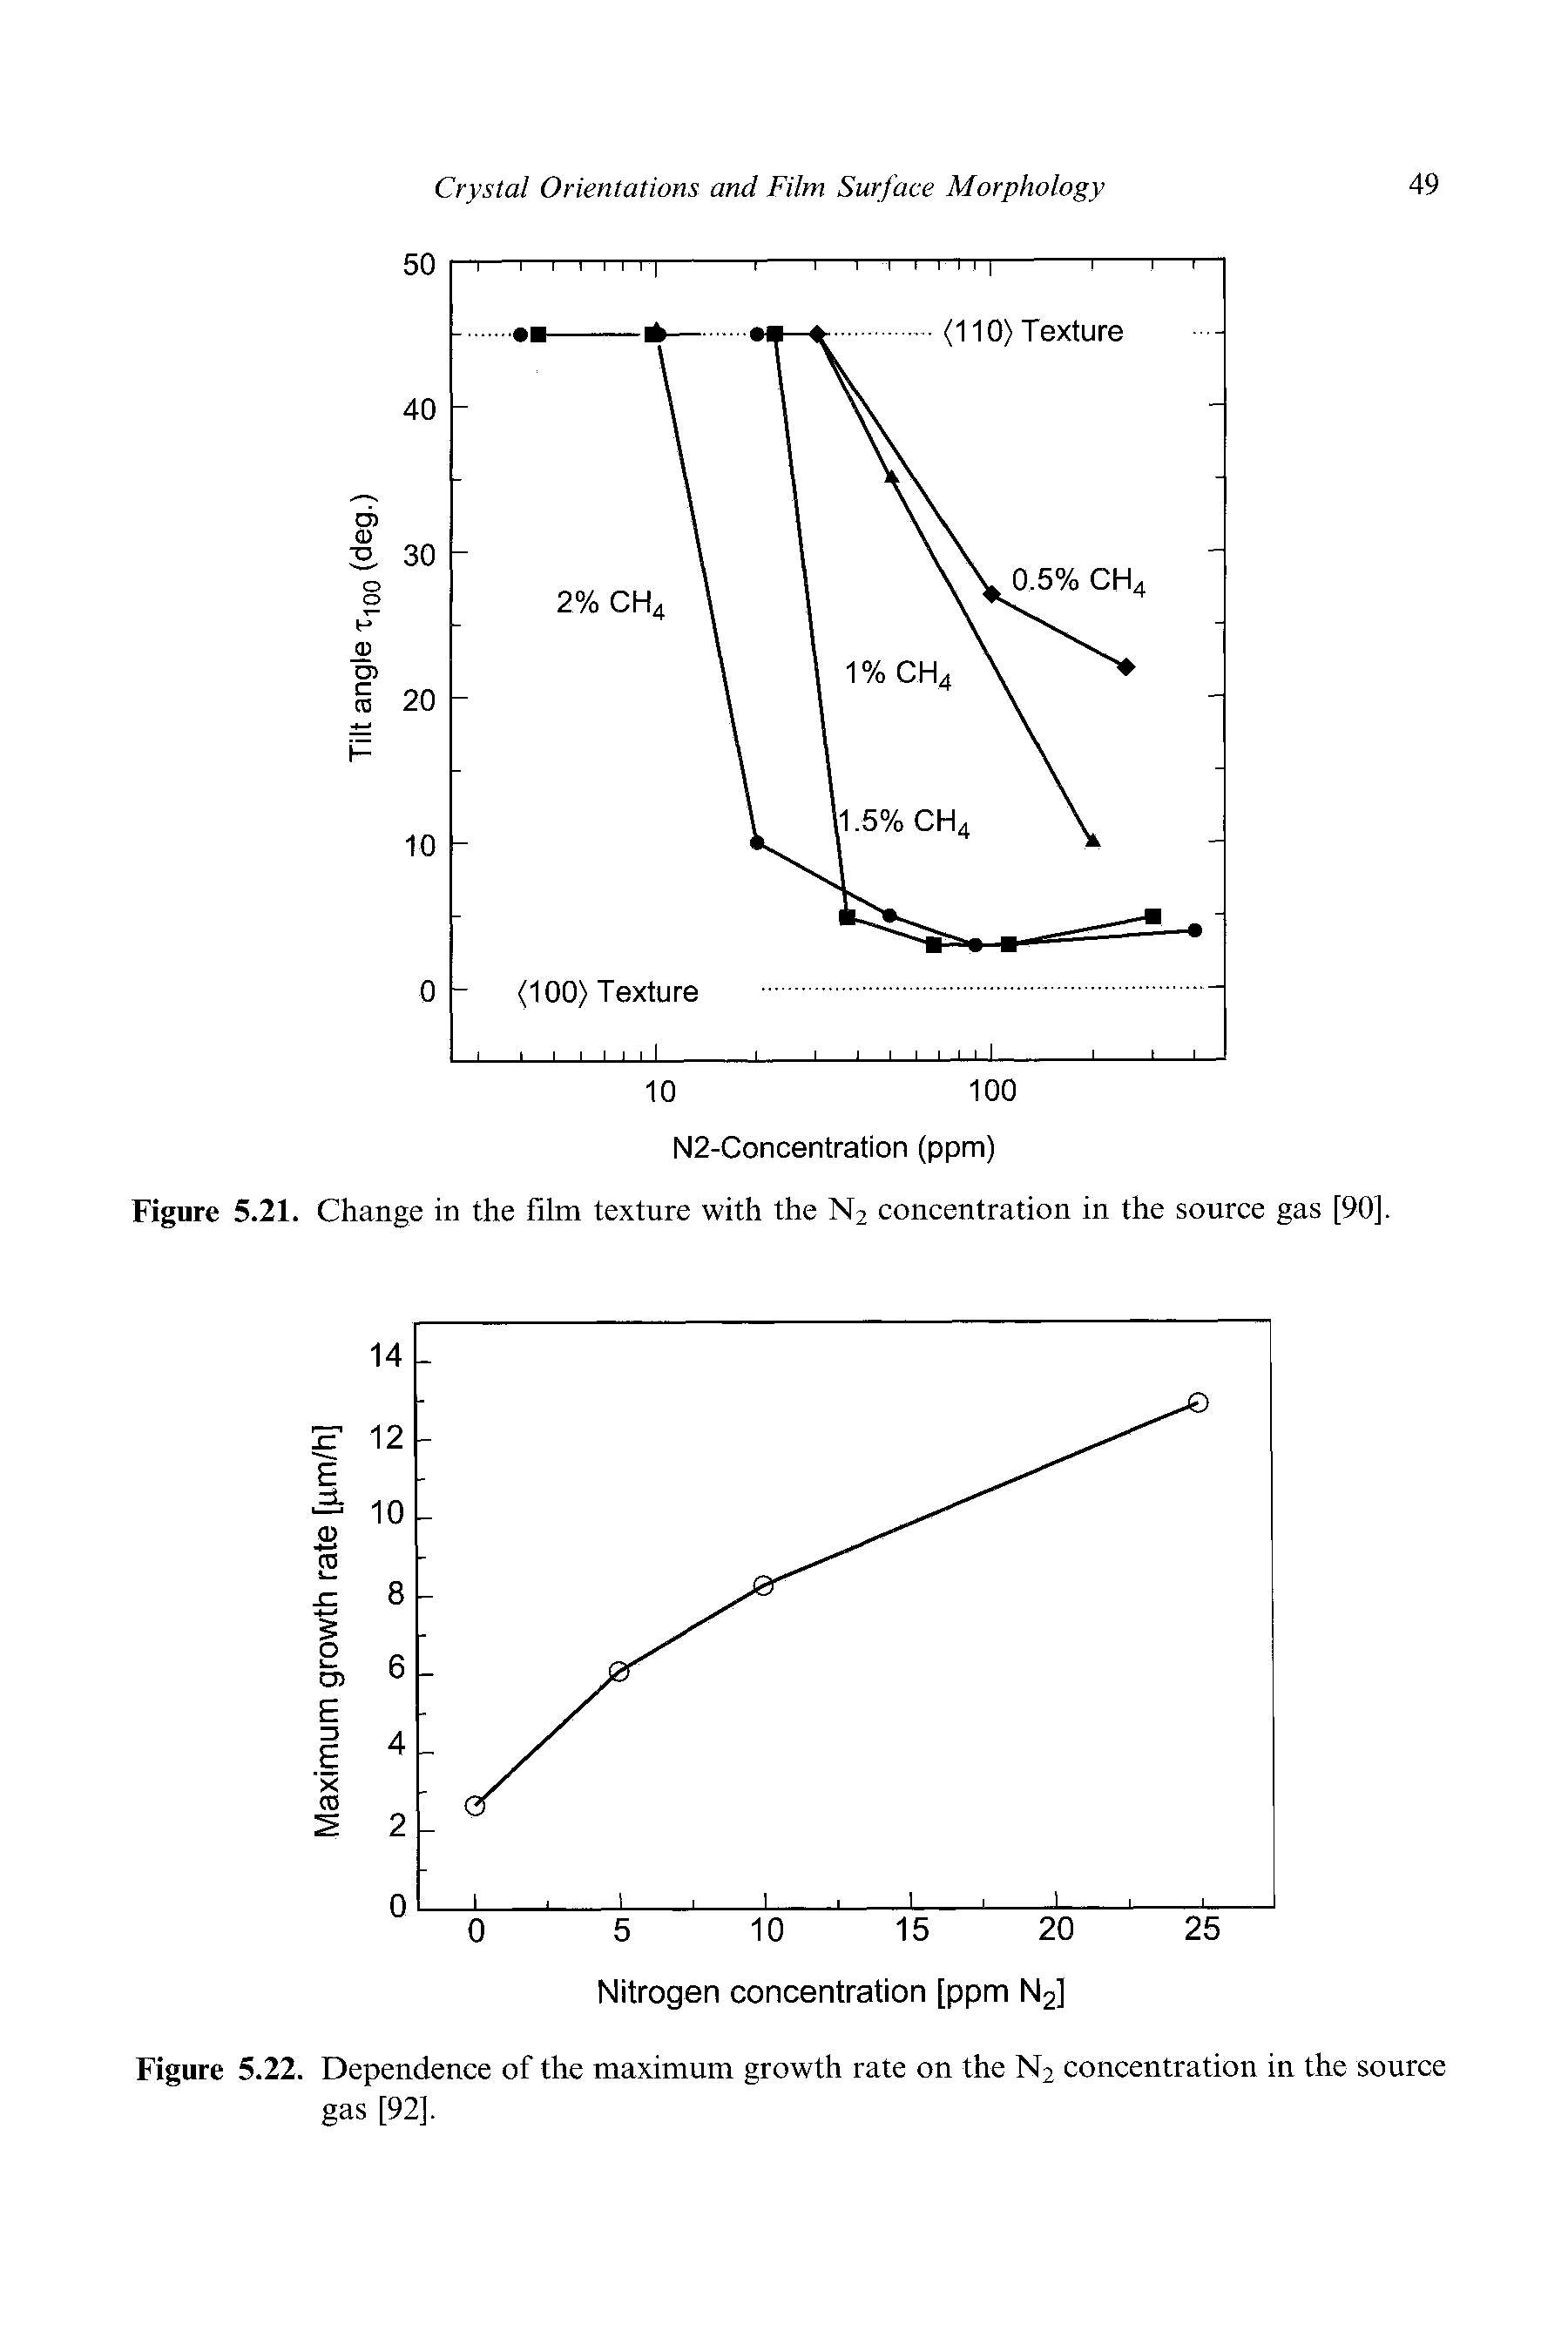 Figure 5.21. Change in the film texture with the N2 concentration in the source gas [90].